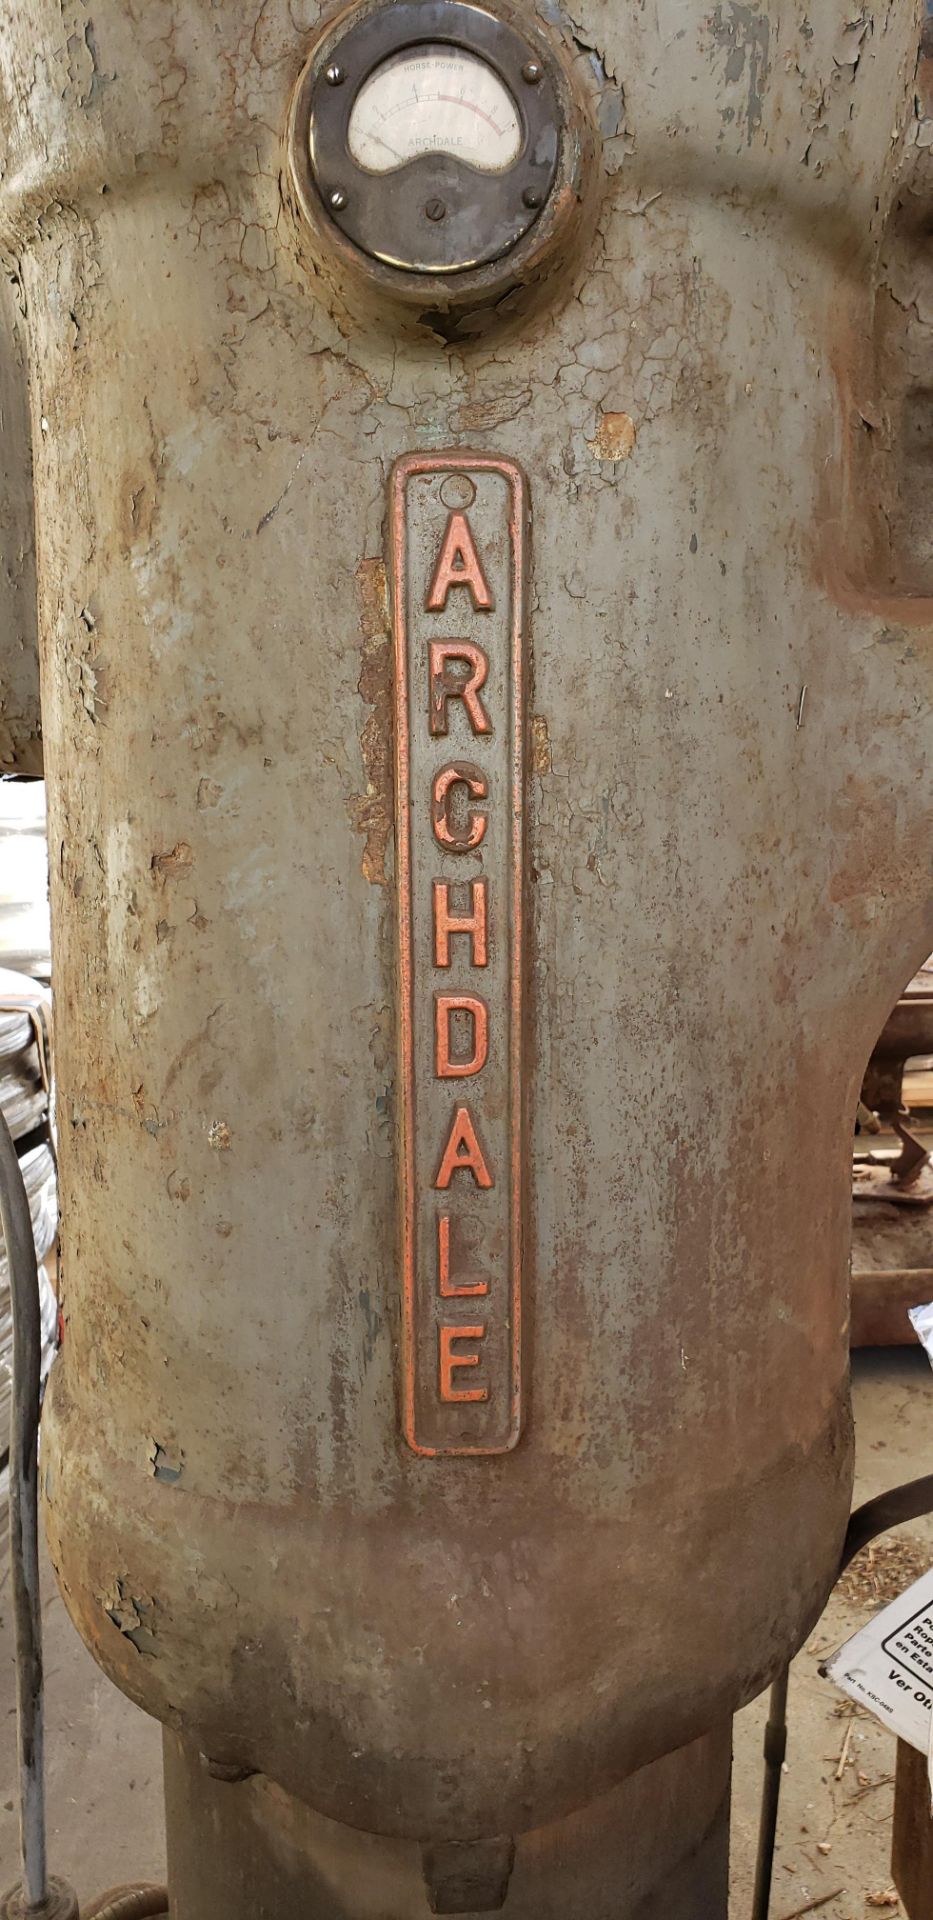 Archdale Heavy Duty Drill Press Foot Print 10' x 4' x 8', Located In: Riverside - Image 3 of 8